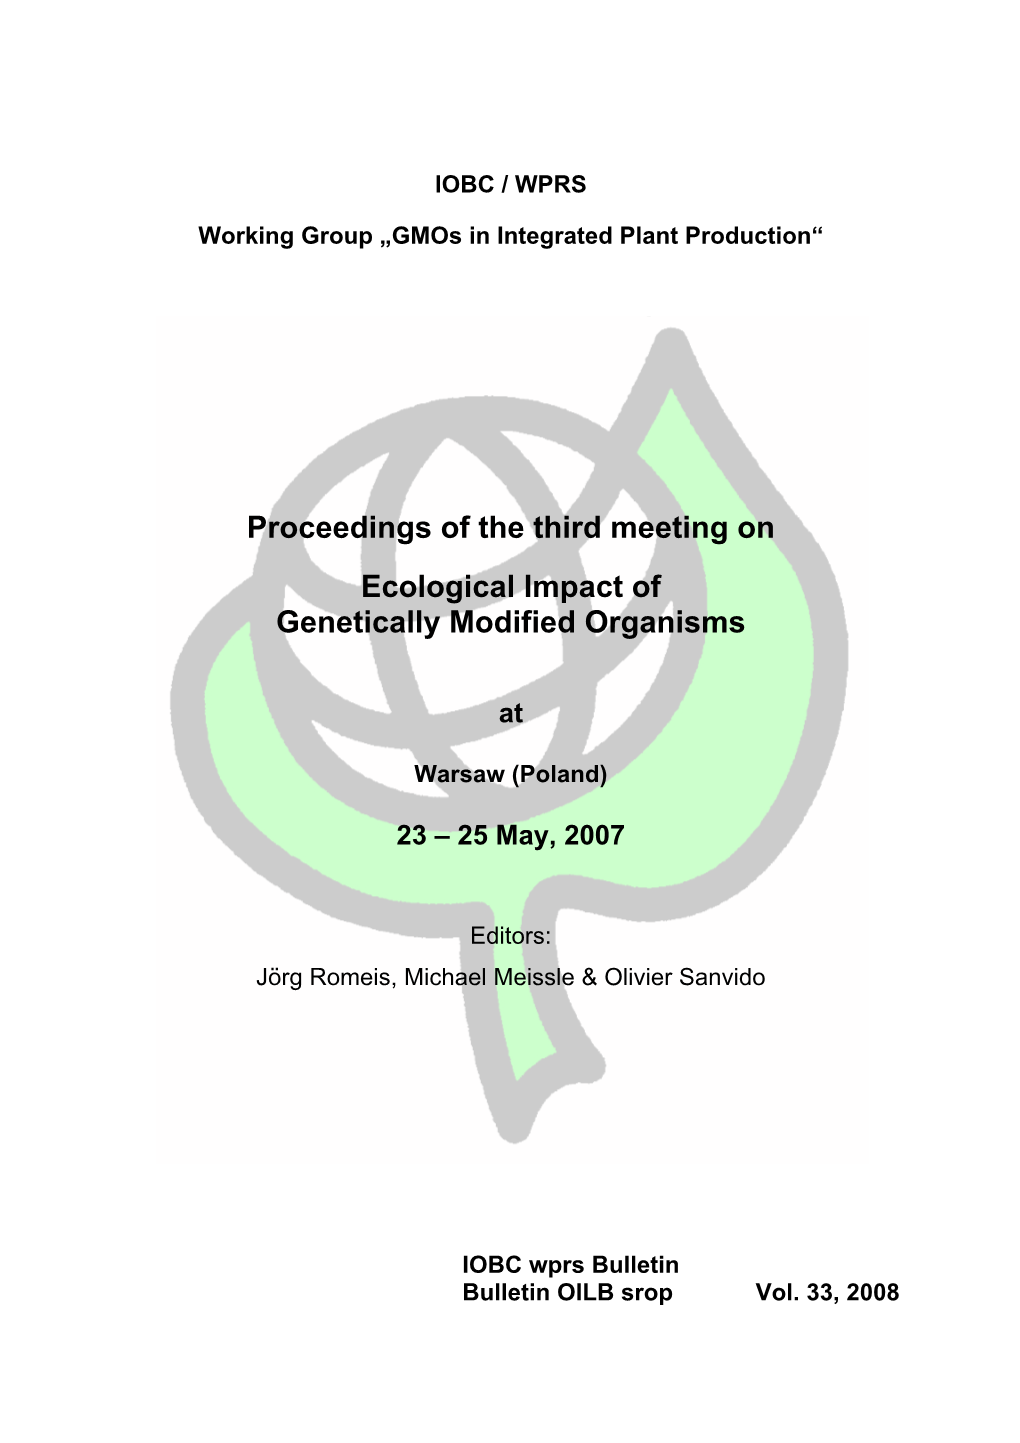 Proceedings of the Third Meeting on Ecological Impact of Genetically